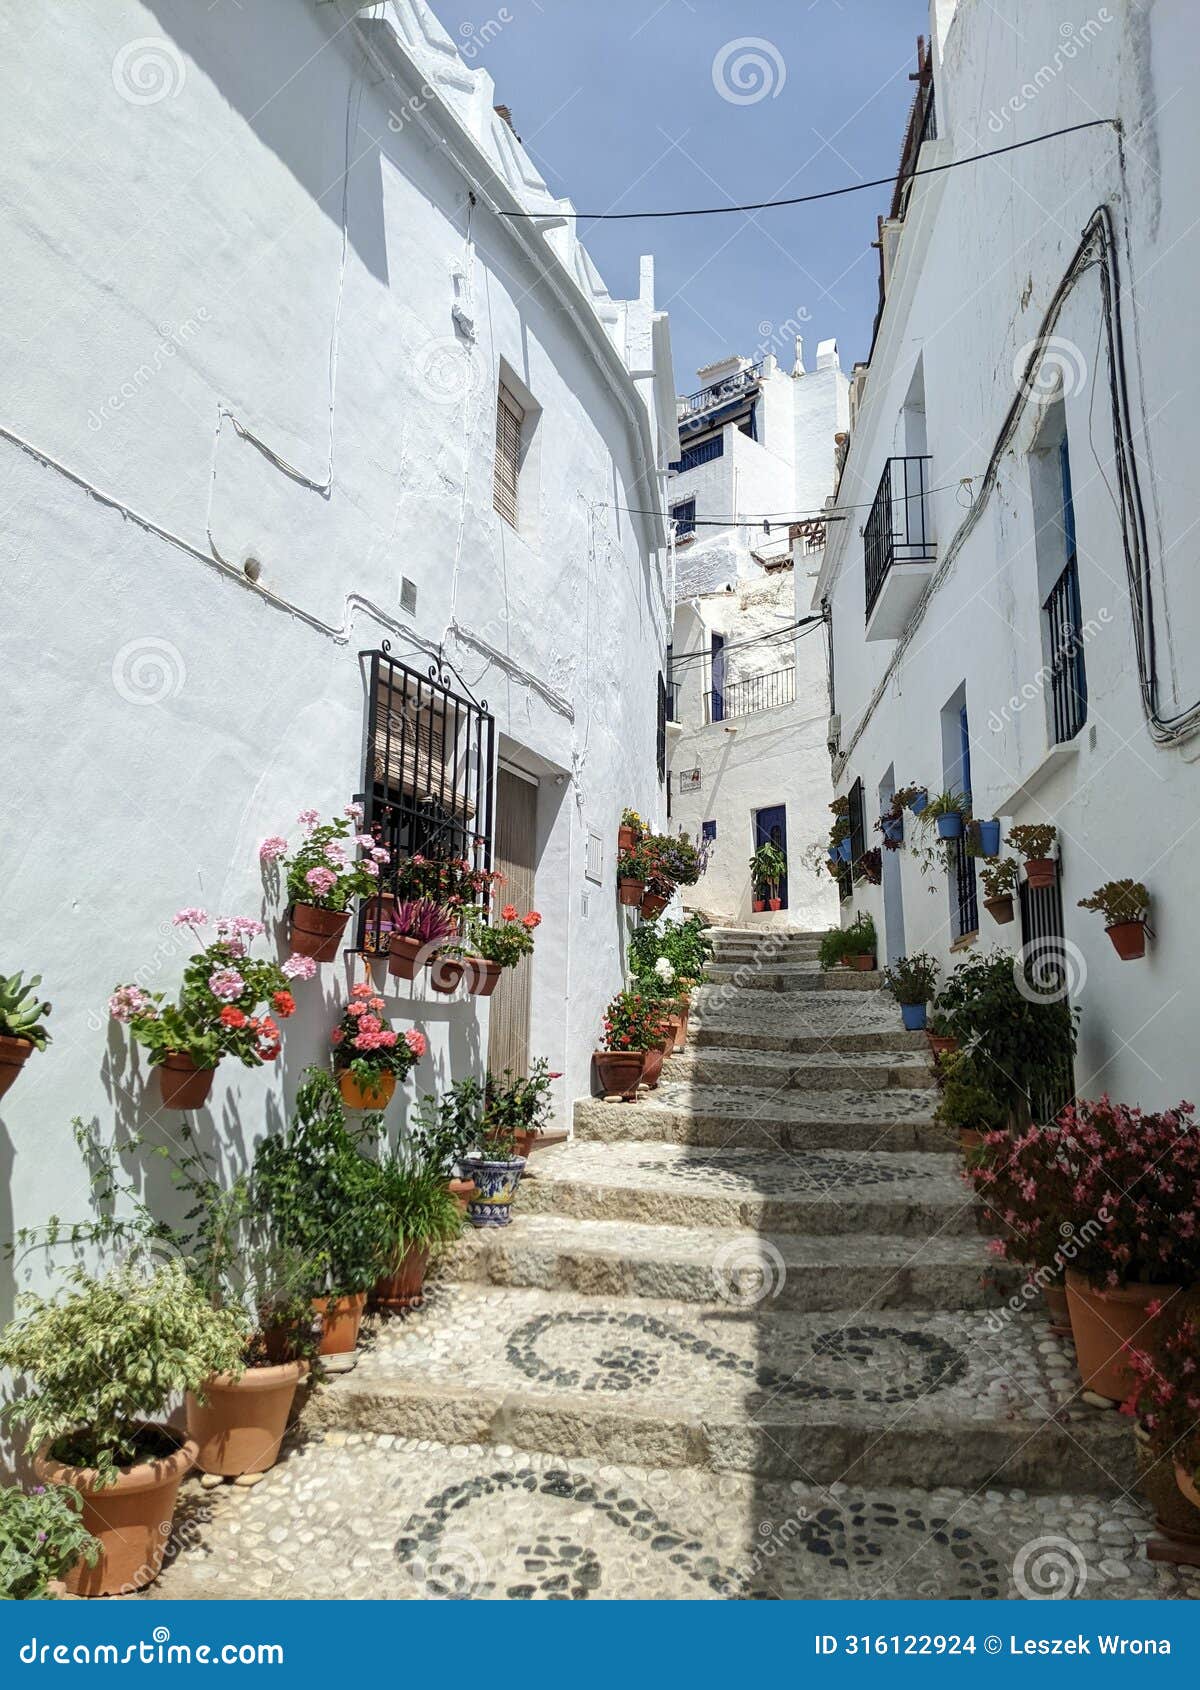 narrow ally in small andalusian town frigiliana in spain